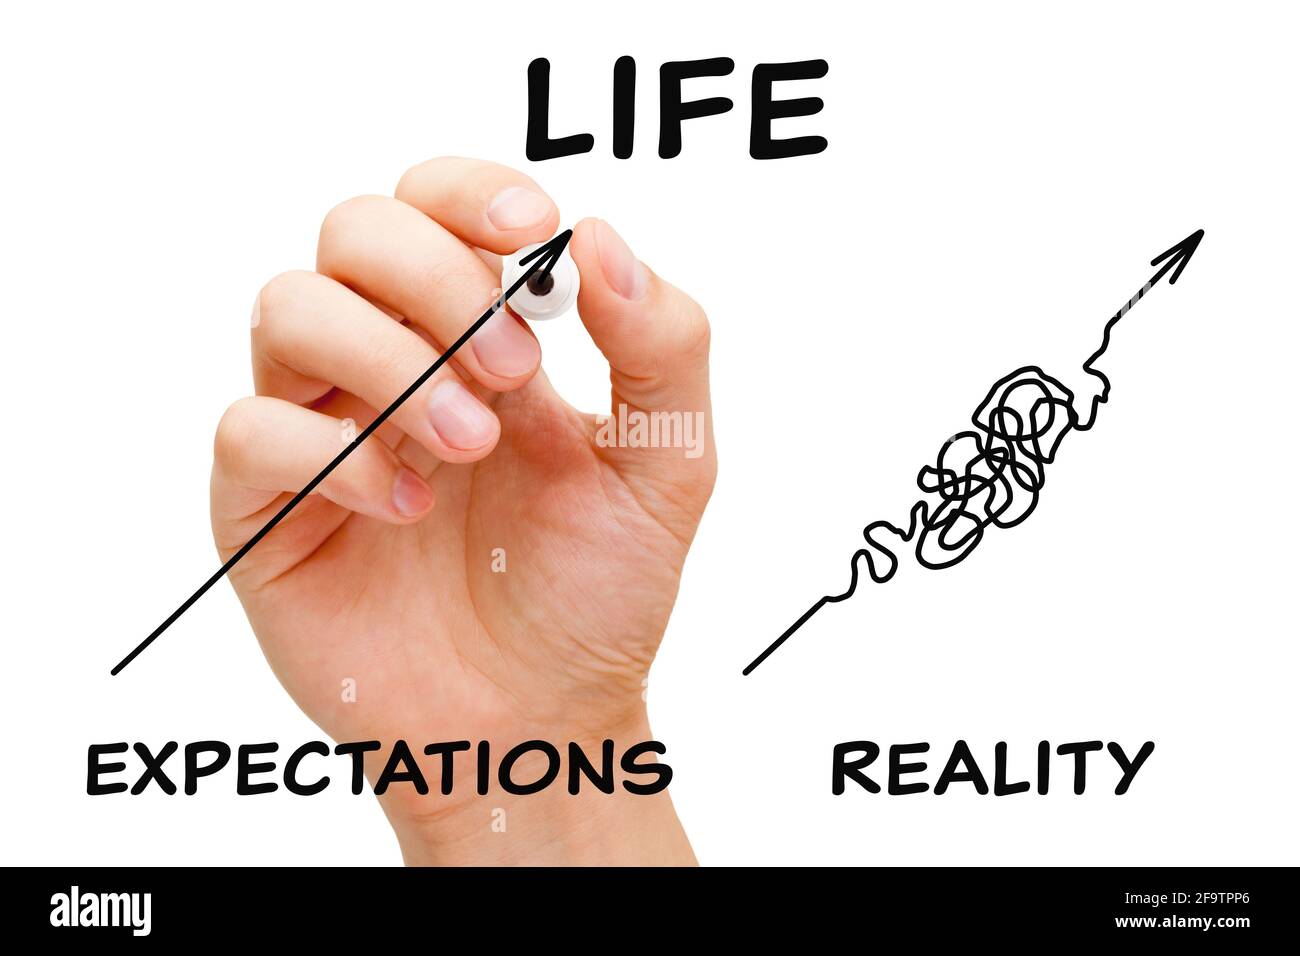 Hand drawing concept about the difference between the life expectations and the reality. Stock Photo